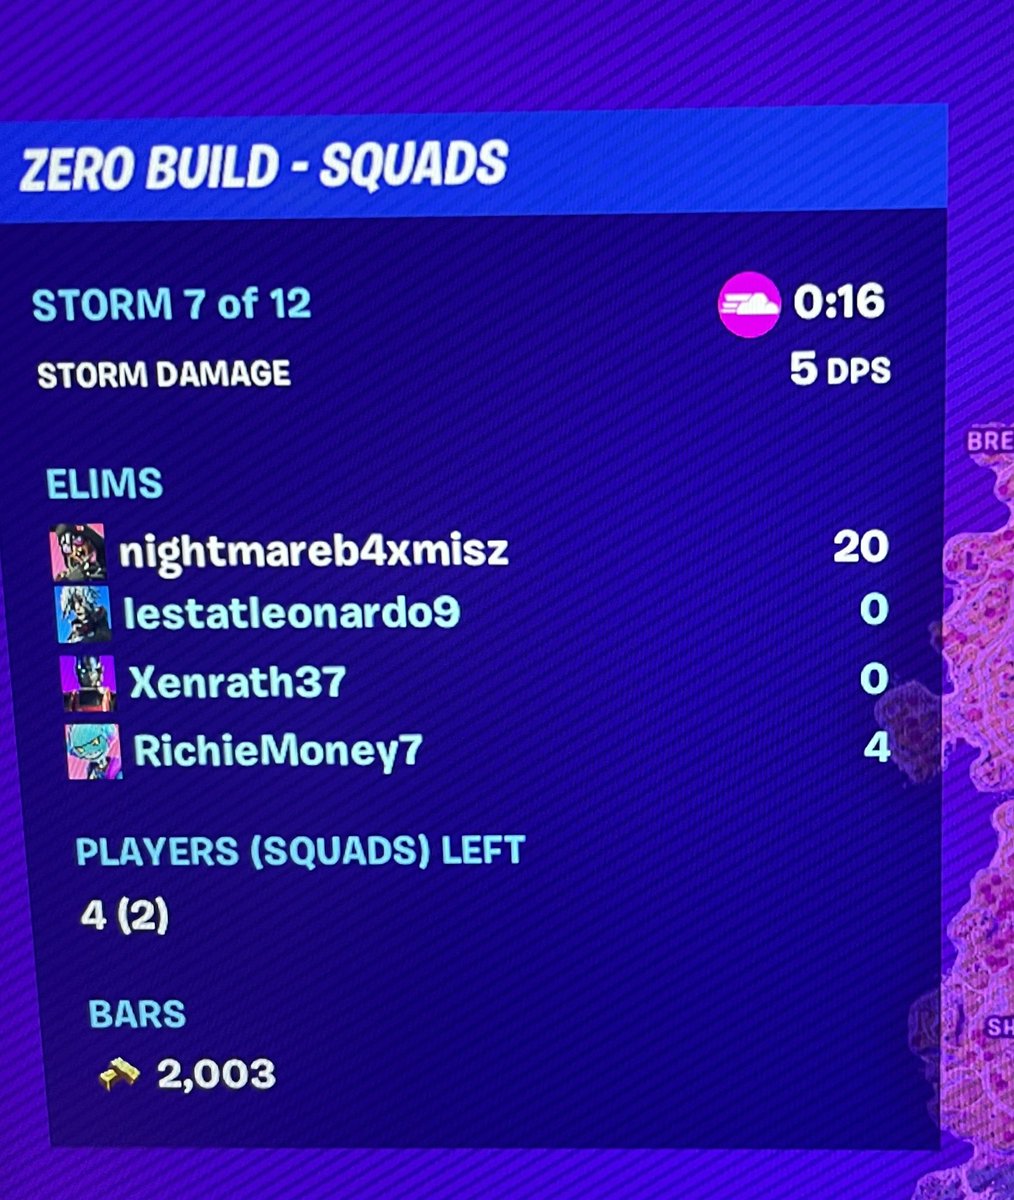 I just dropped a 20 bomb in #fortnite squads. Get at me Nightmareb4xmisz https://t.co/yPV6PIHR3u